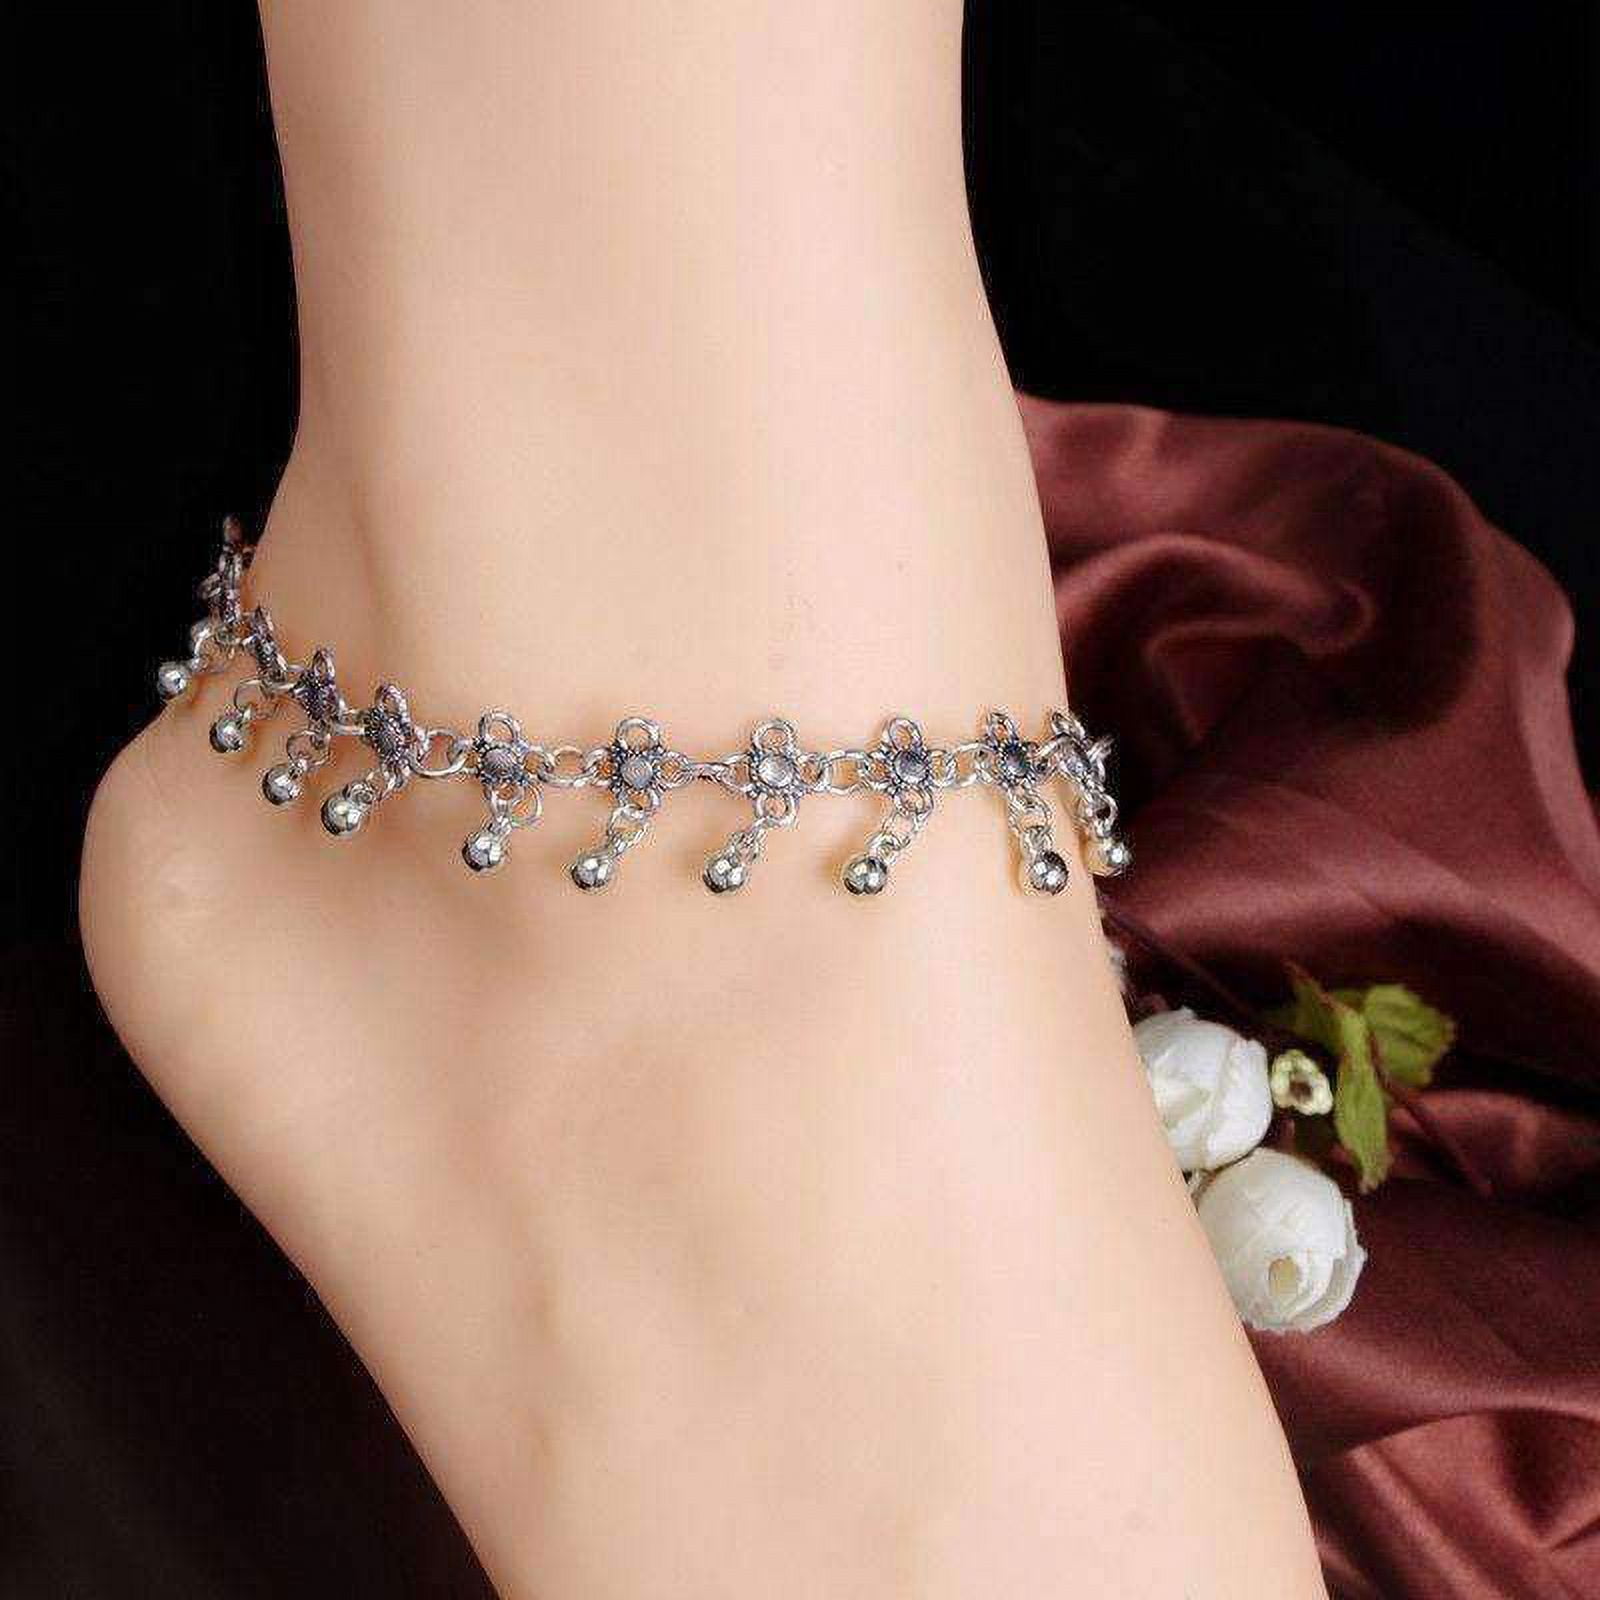 Silver Anklets Designs starting @ Rs. 510 -Shaya by CaratLane